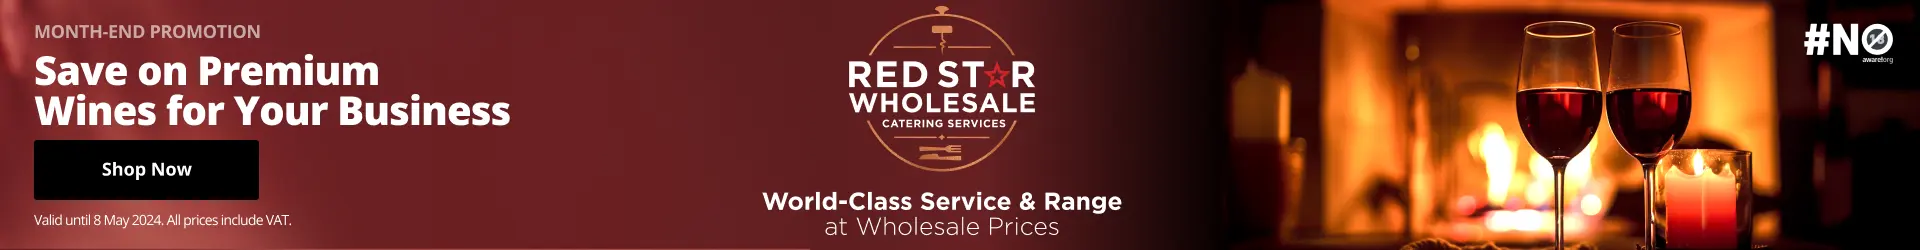 red star wholesale